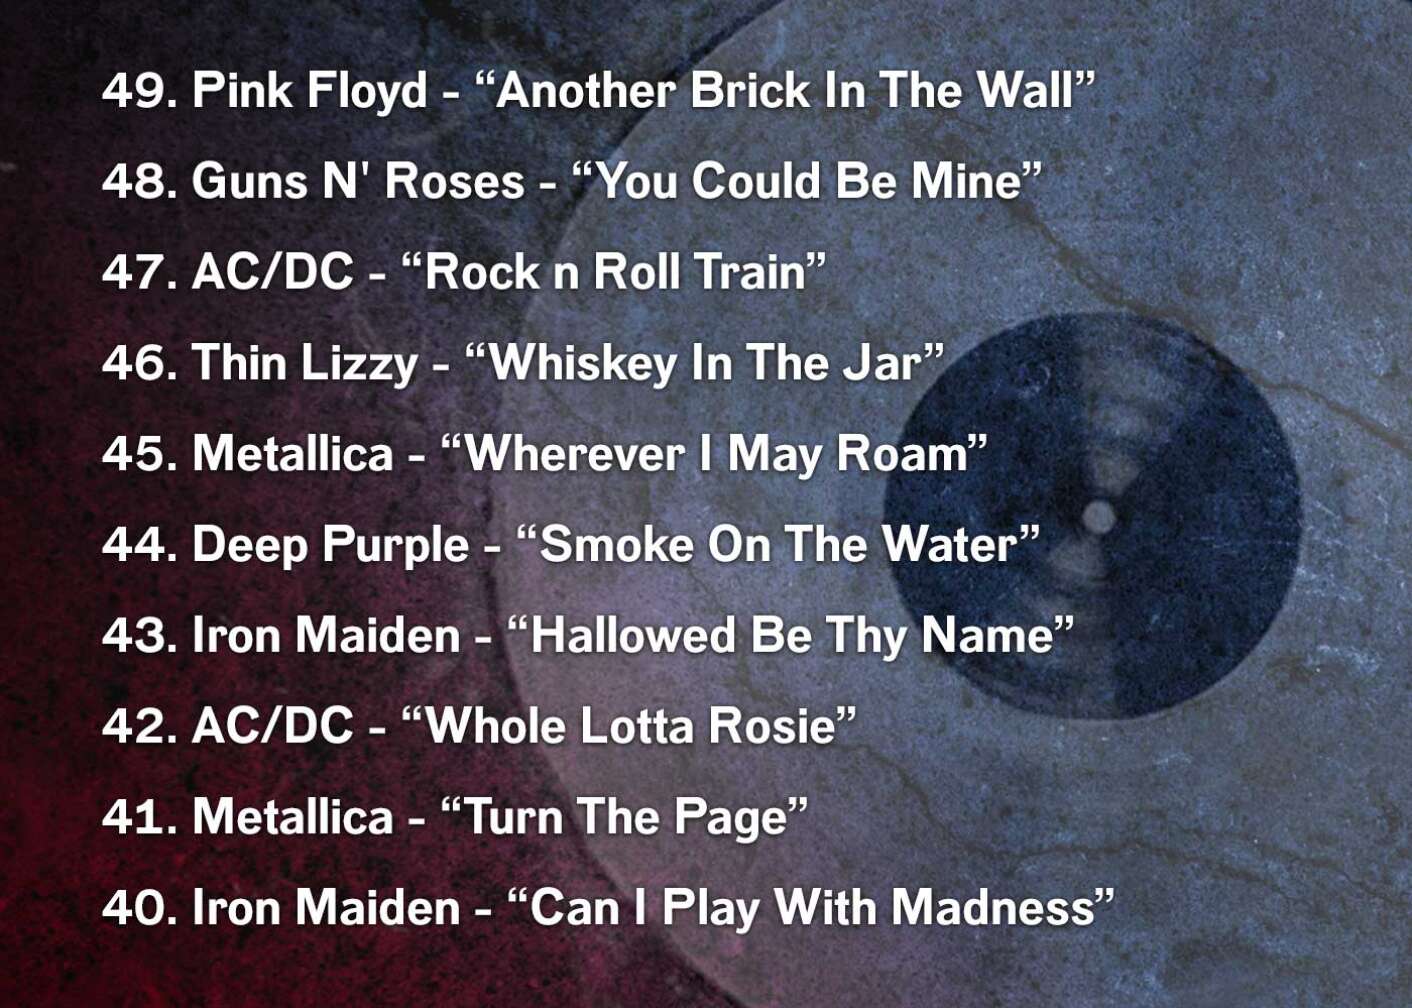 49. Pink Floyd - “Another Brick In The Wall” 48. Guns N' Roses - “You Could Be Mine” 47. AC/DC - “Rock n Roll Train” 46. Thin Lizzy - “Whiskey In The Jar” 45. Metallica - “Wherever I May Roam” 44. Deep Purple - “Smoke On The Water” 43. Iron Maiden - “Hallowed Be Thy Name” 42. AC/DC - “Whole Lotta Rosie” 41. Metallica - “Turn The Page” 40. Iron Maiden - “Can I Play With Madness”